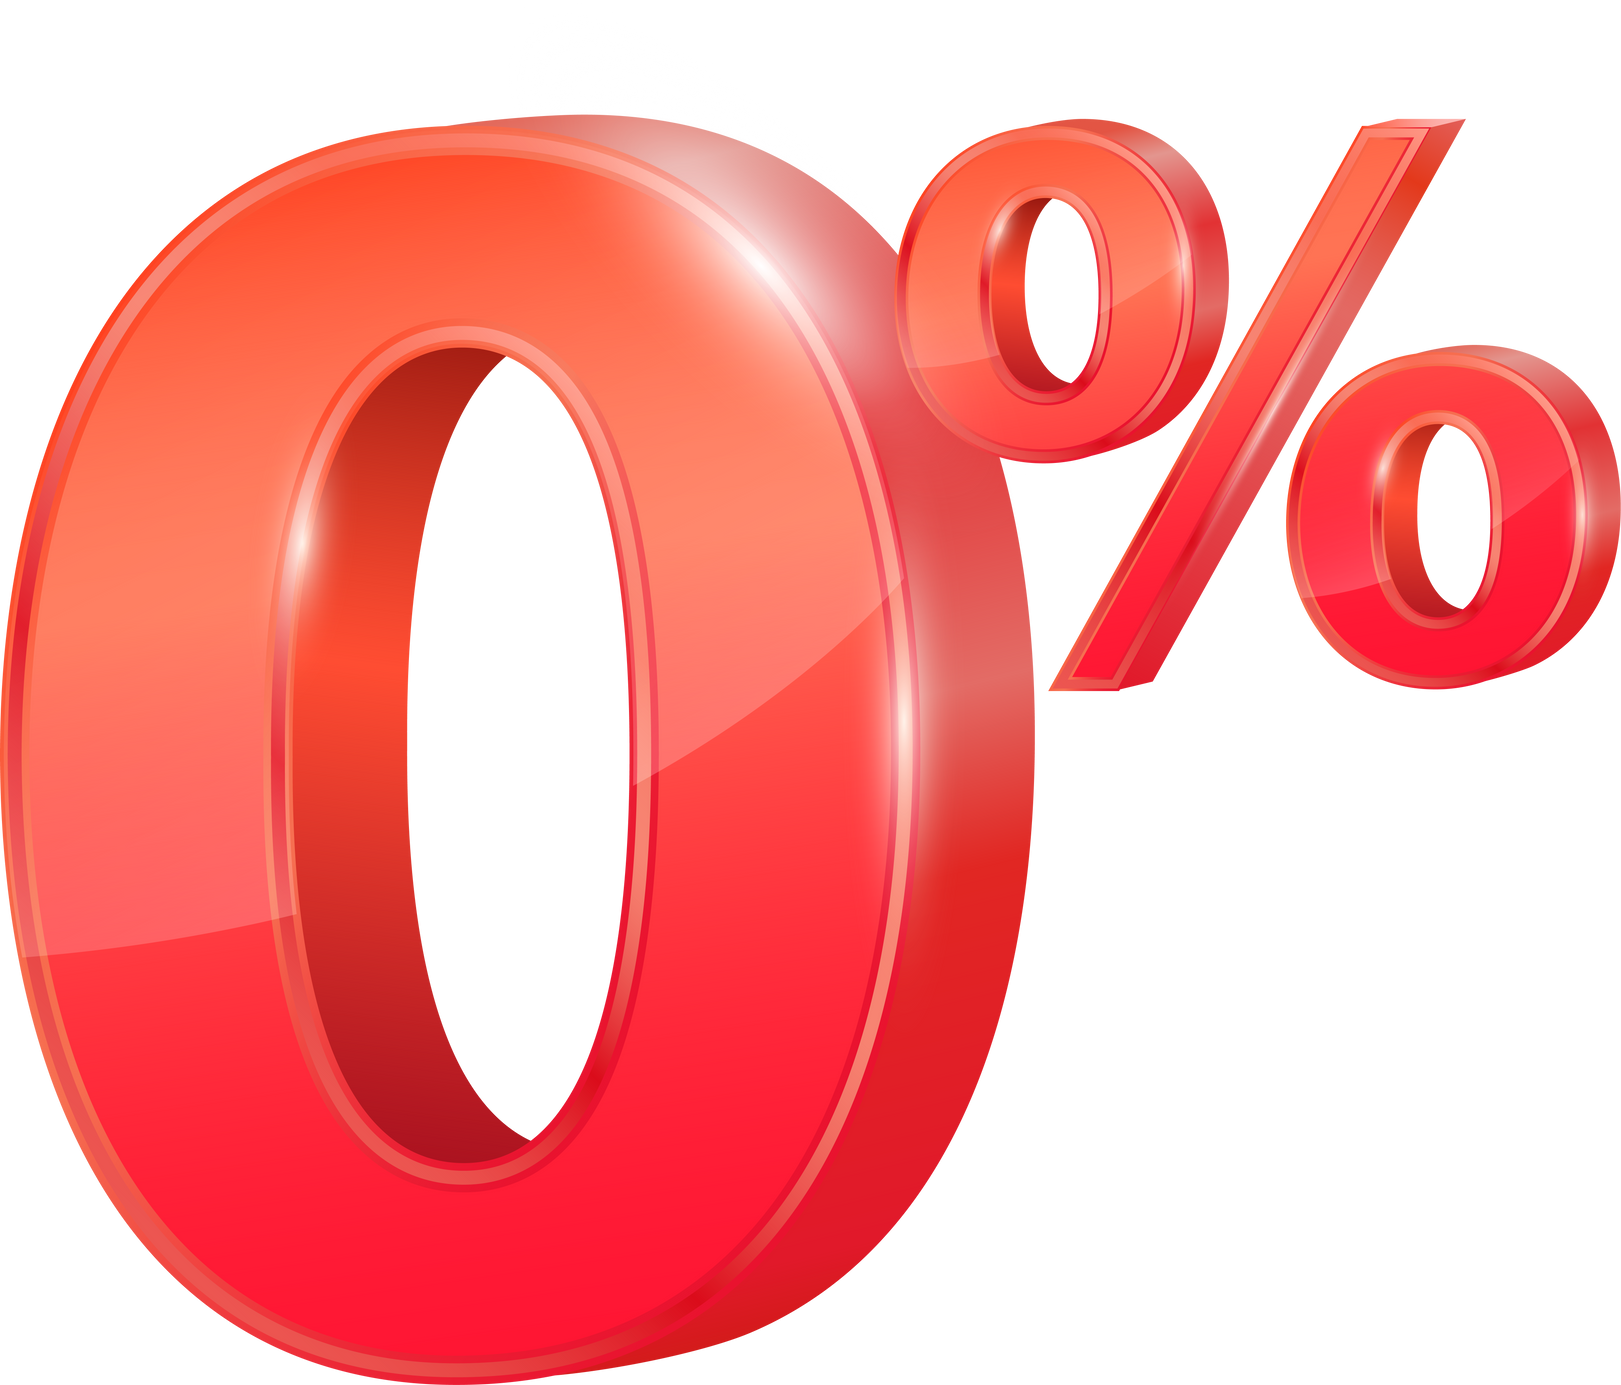 Red 0% text. Zero percent for special offer.  Financial business concept. 3D file PNG illustration.